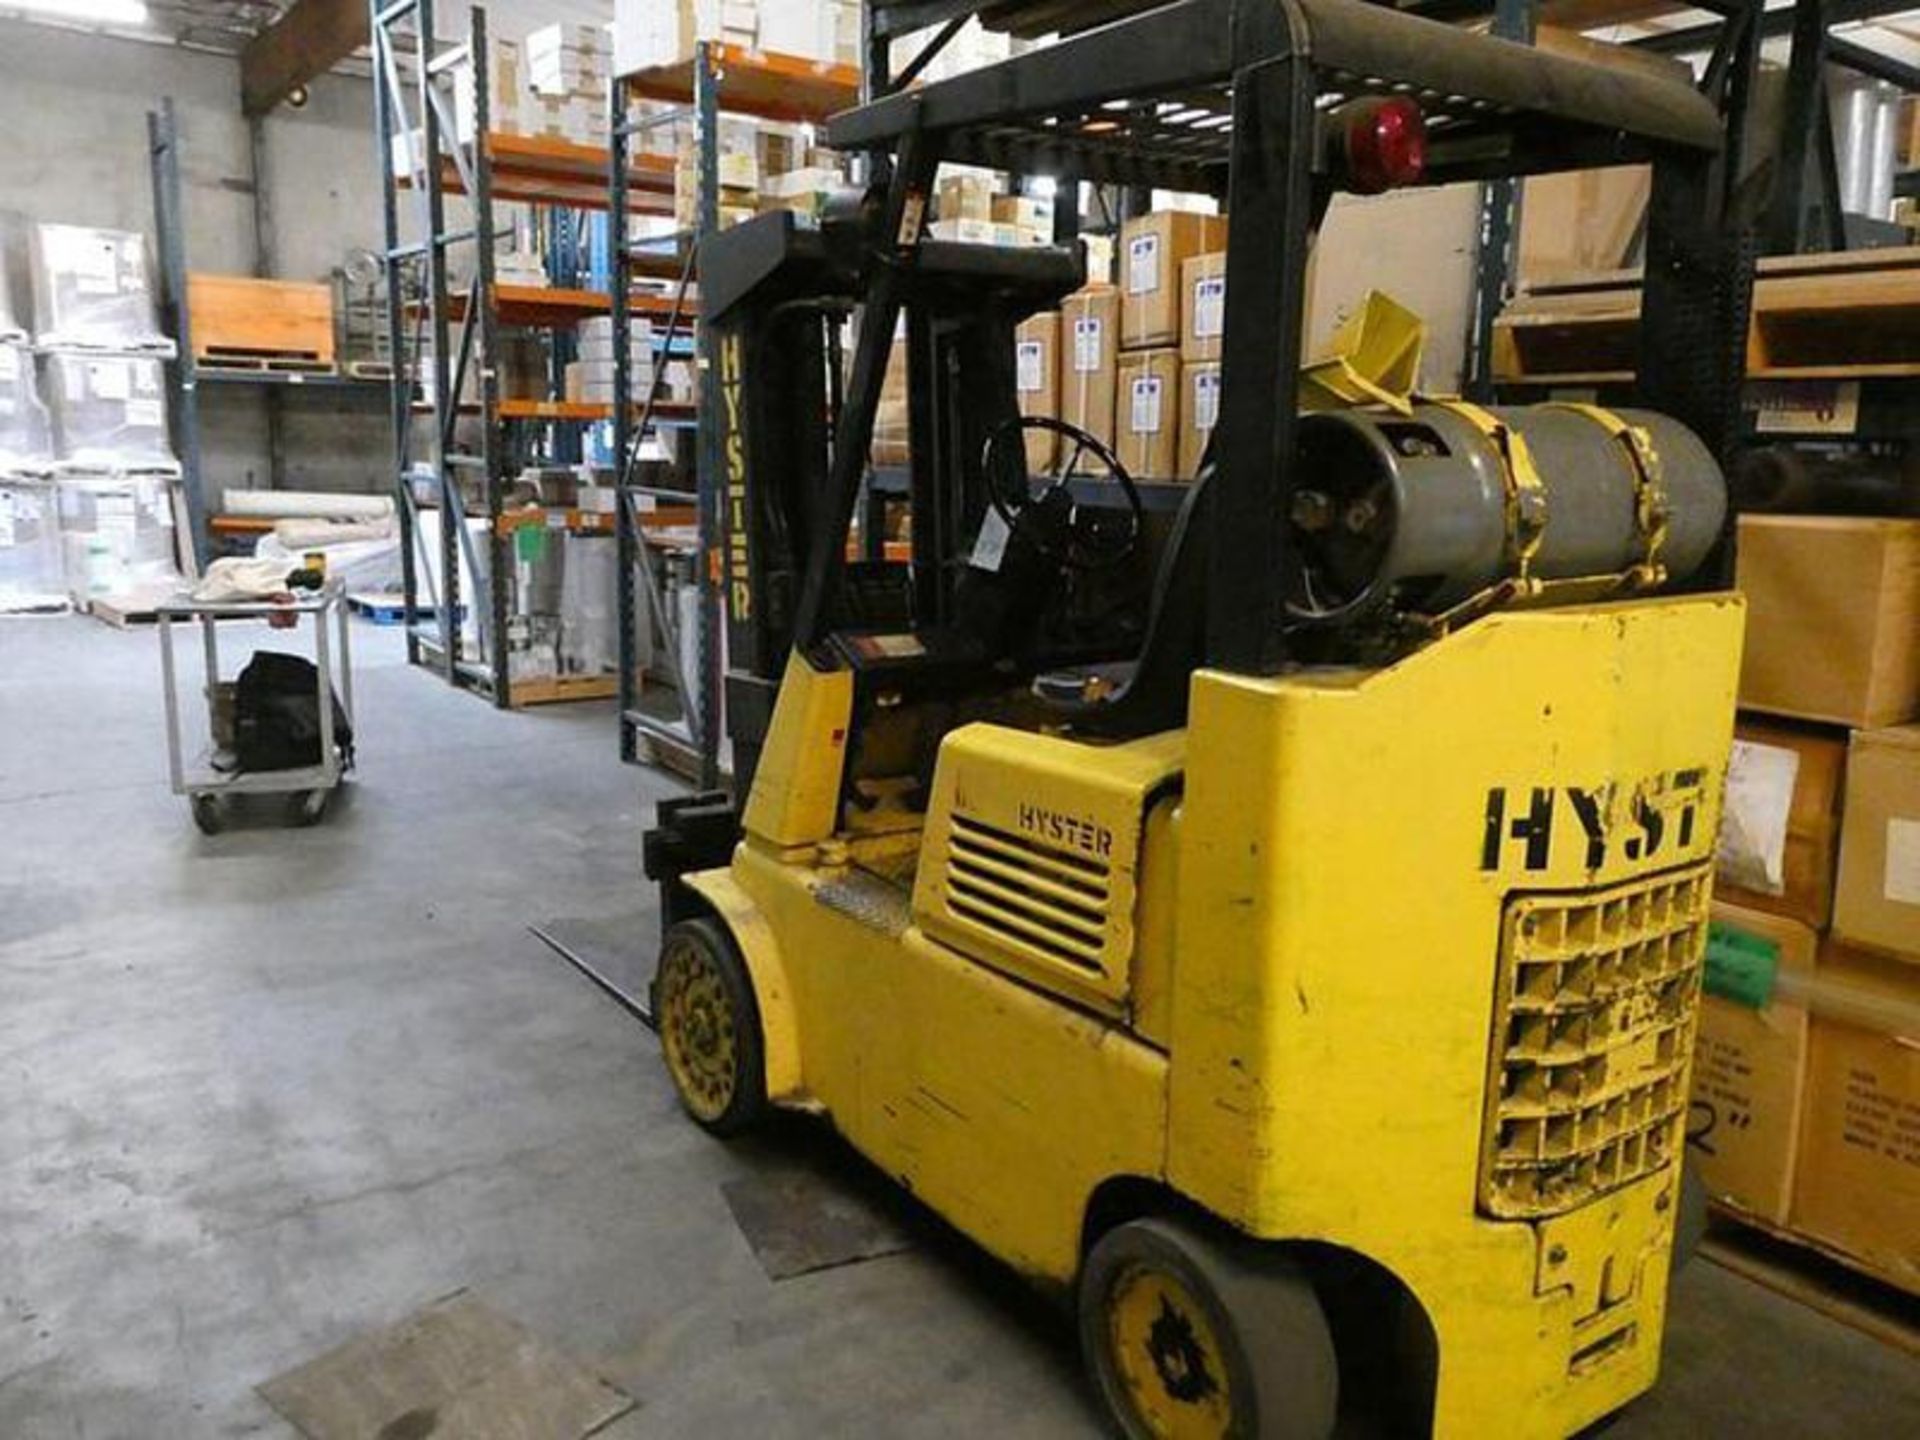 8,000 POUND HYSTER S80EBCS FORKLIFT PROPANE POWERED - Image 2 of 5